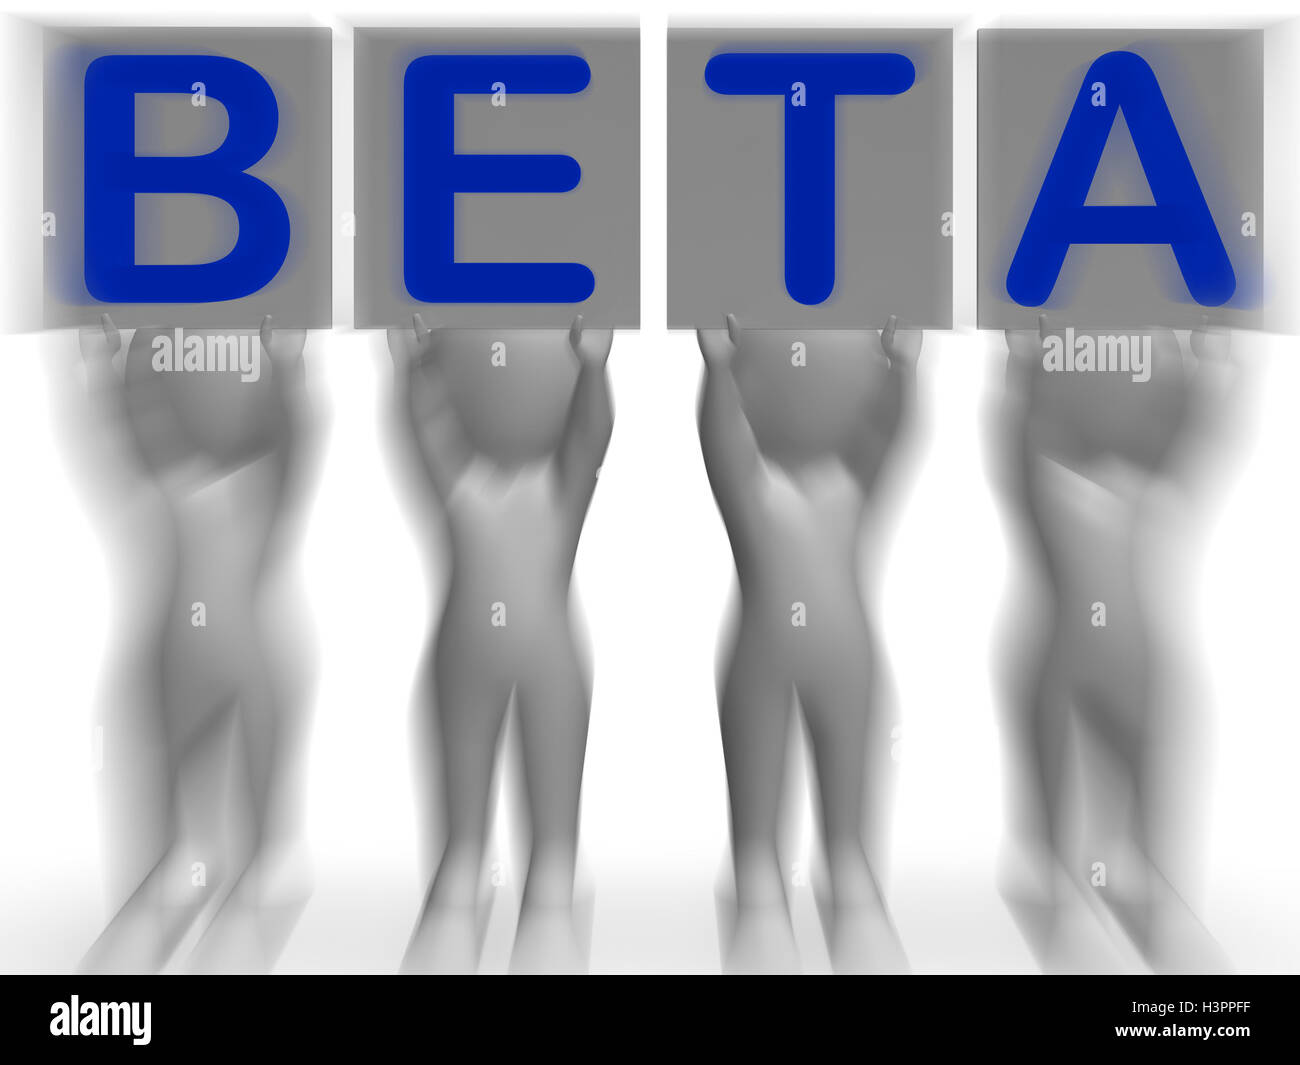 Beta Placards Means Software Testing And Development Stock Photo